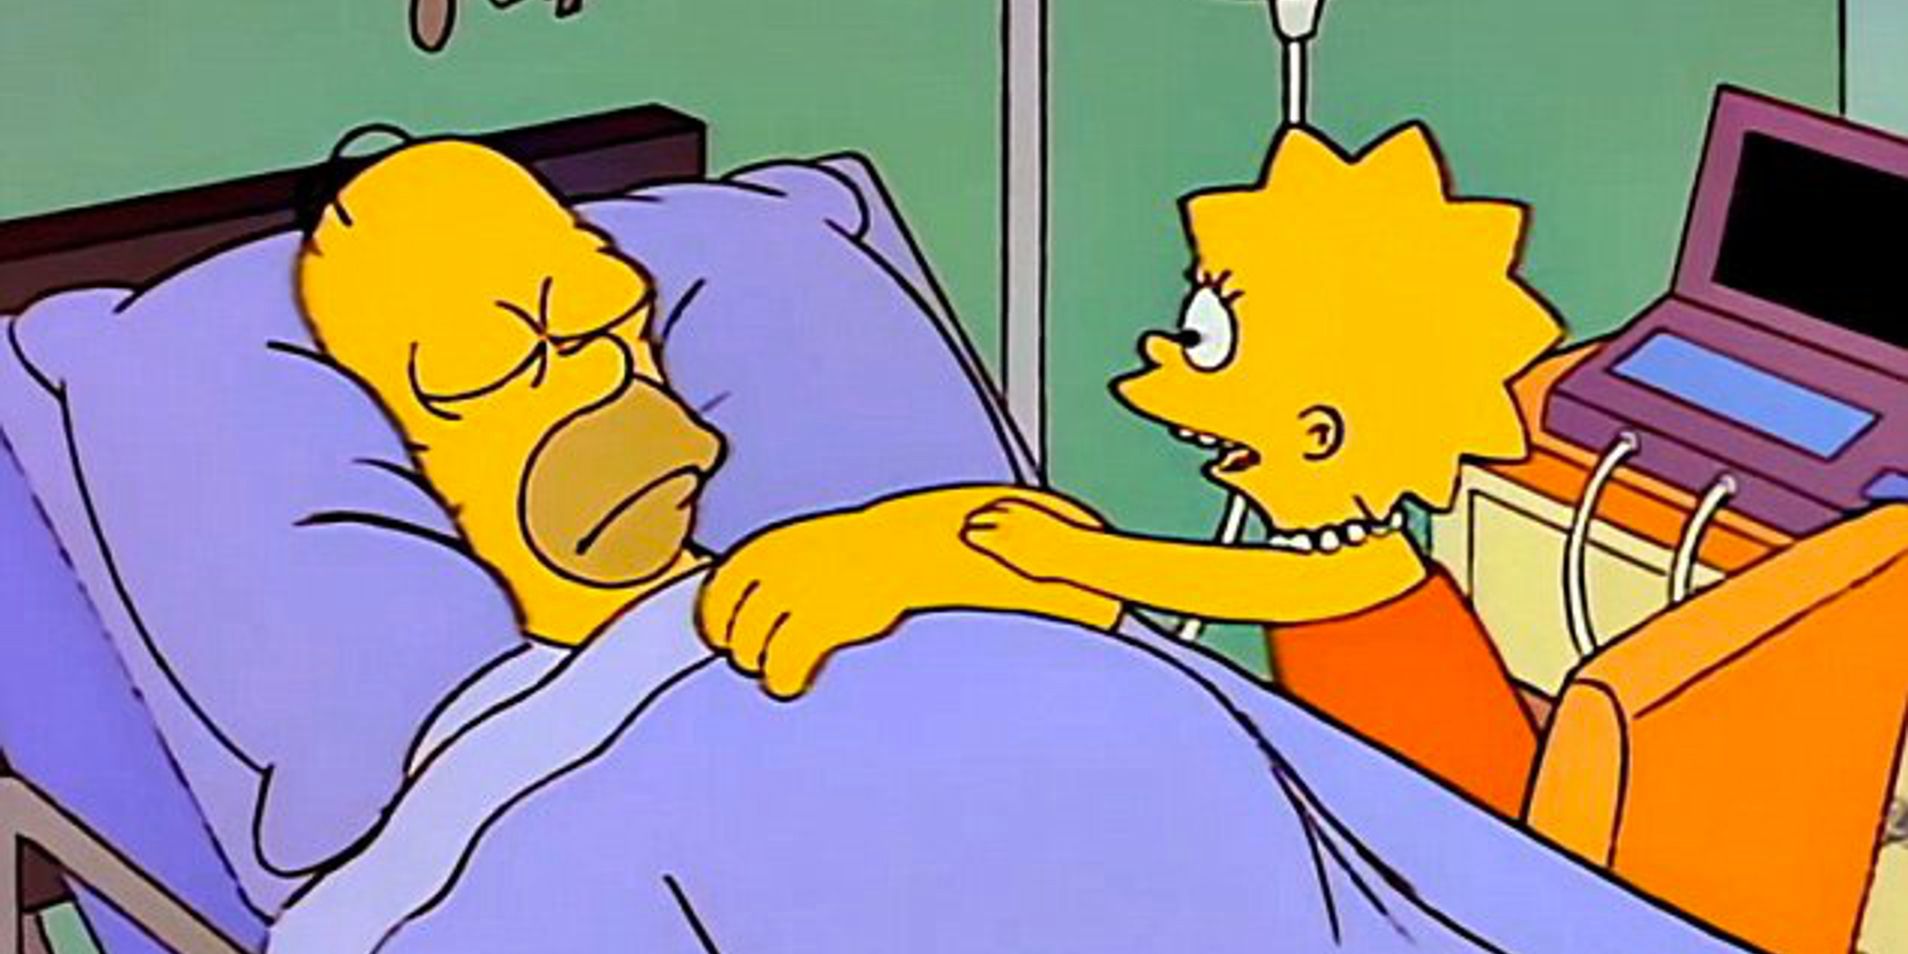 Lisa Simpson tries to wake her father Homer in the hospital in The Simpsons